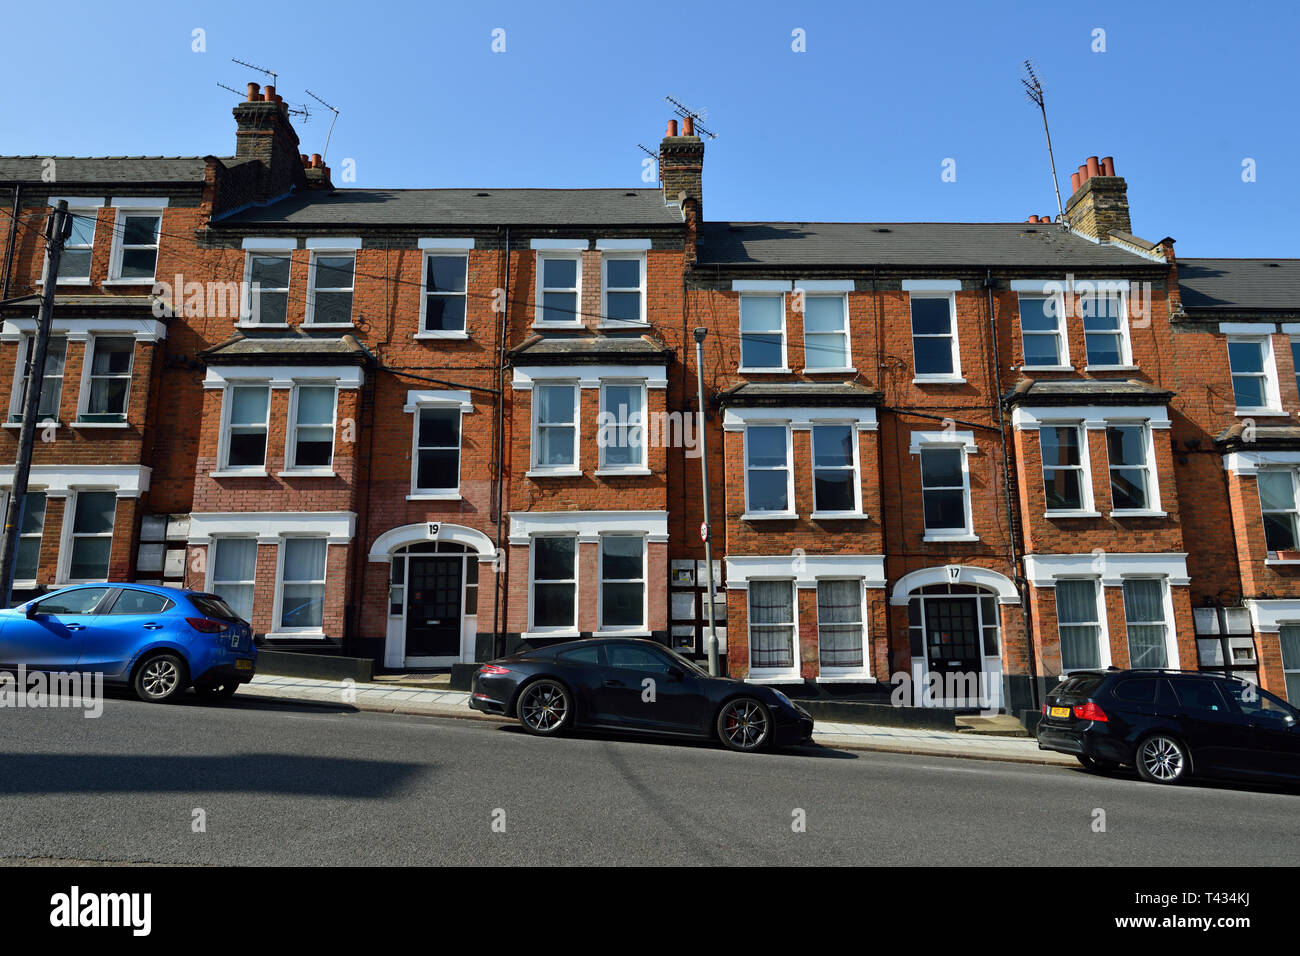 Terraced Residential Houses, Theatre Street, Clapham Junction, Battersea, South West London, United Kingdom Stock Photo